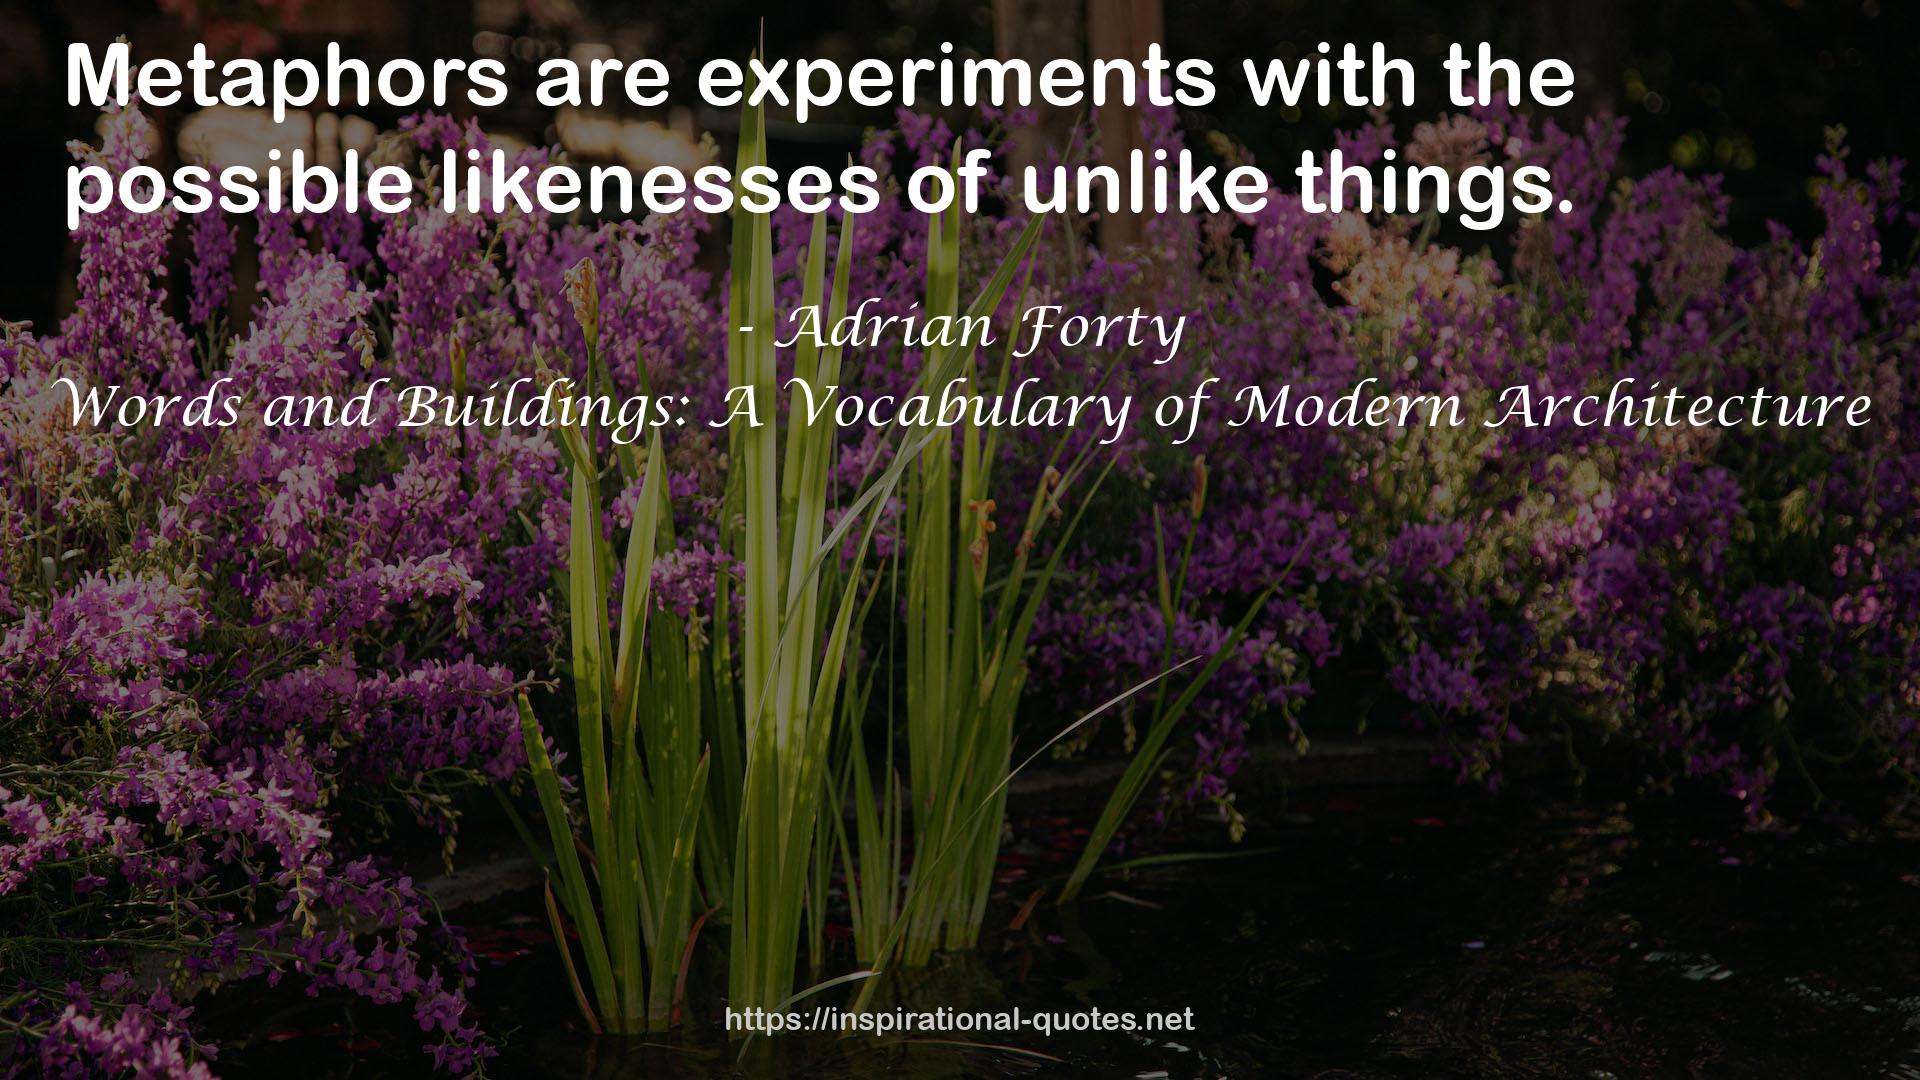 Words and Buildings: A Vocabulary of Modern Architecture QUOTES